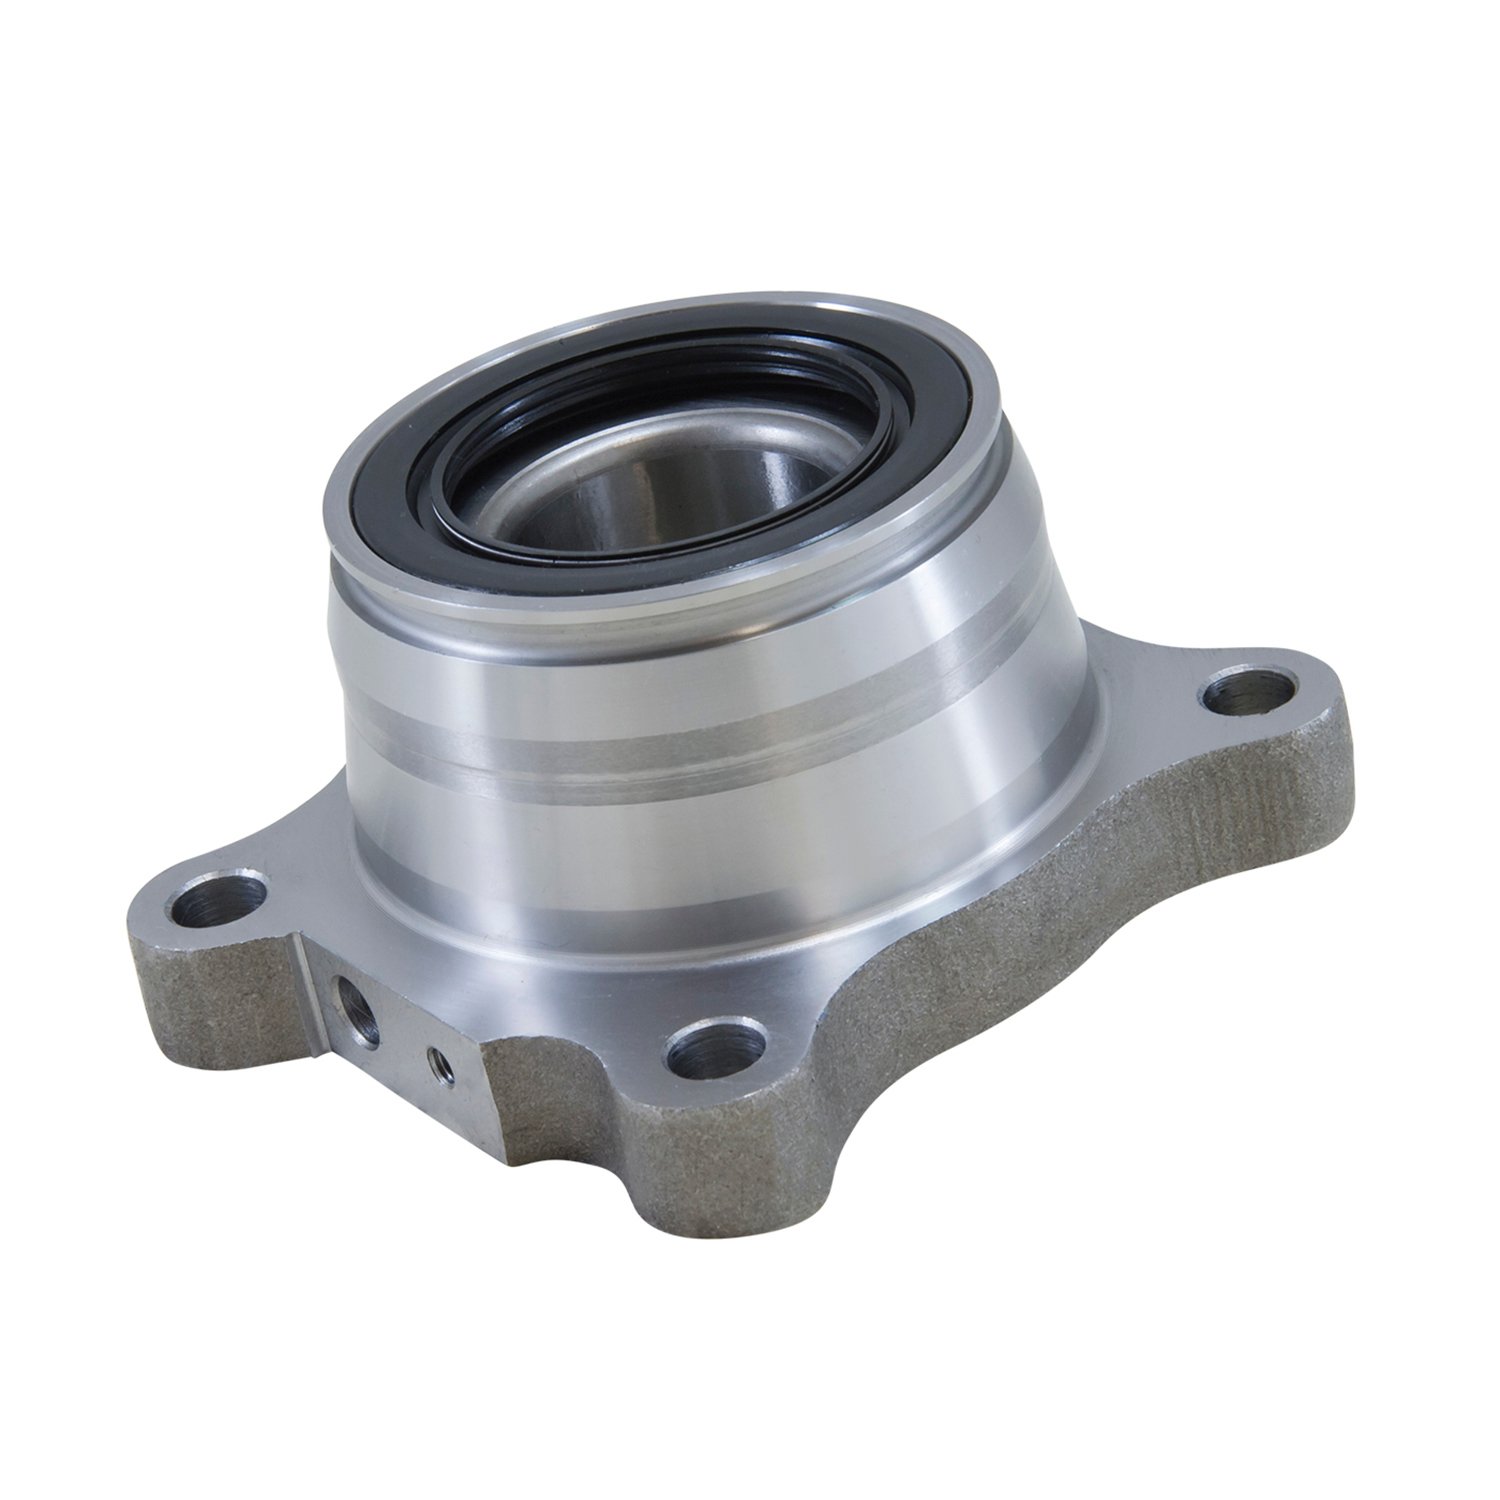 Unit Bearing For '00-'06 TJ, '00-'01 Xj, Commander & Zj With Disc Brakes.